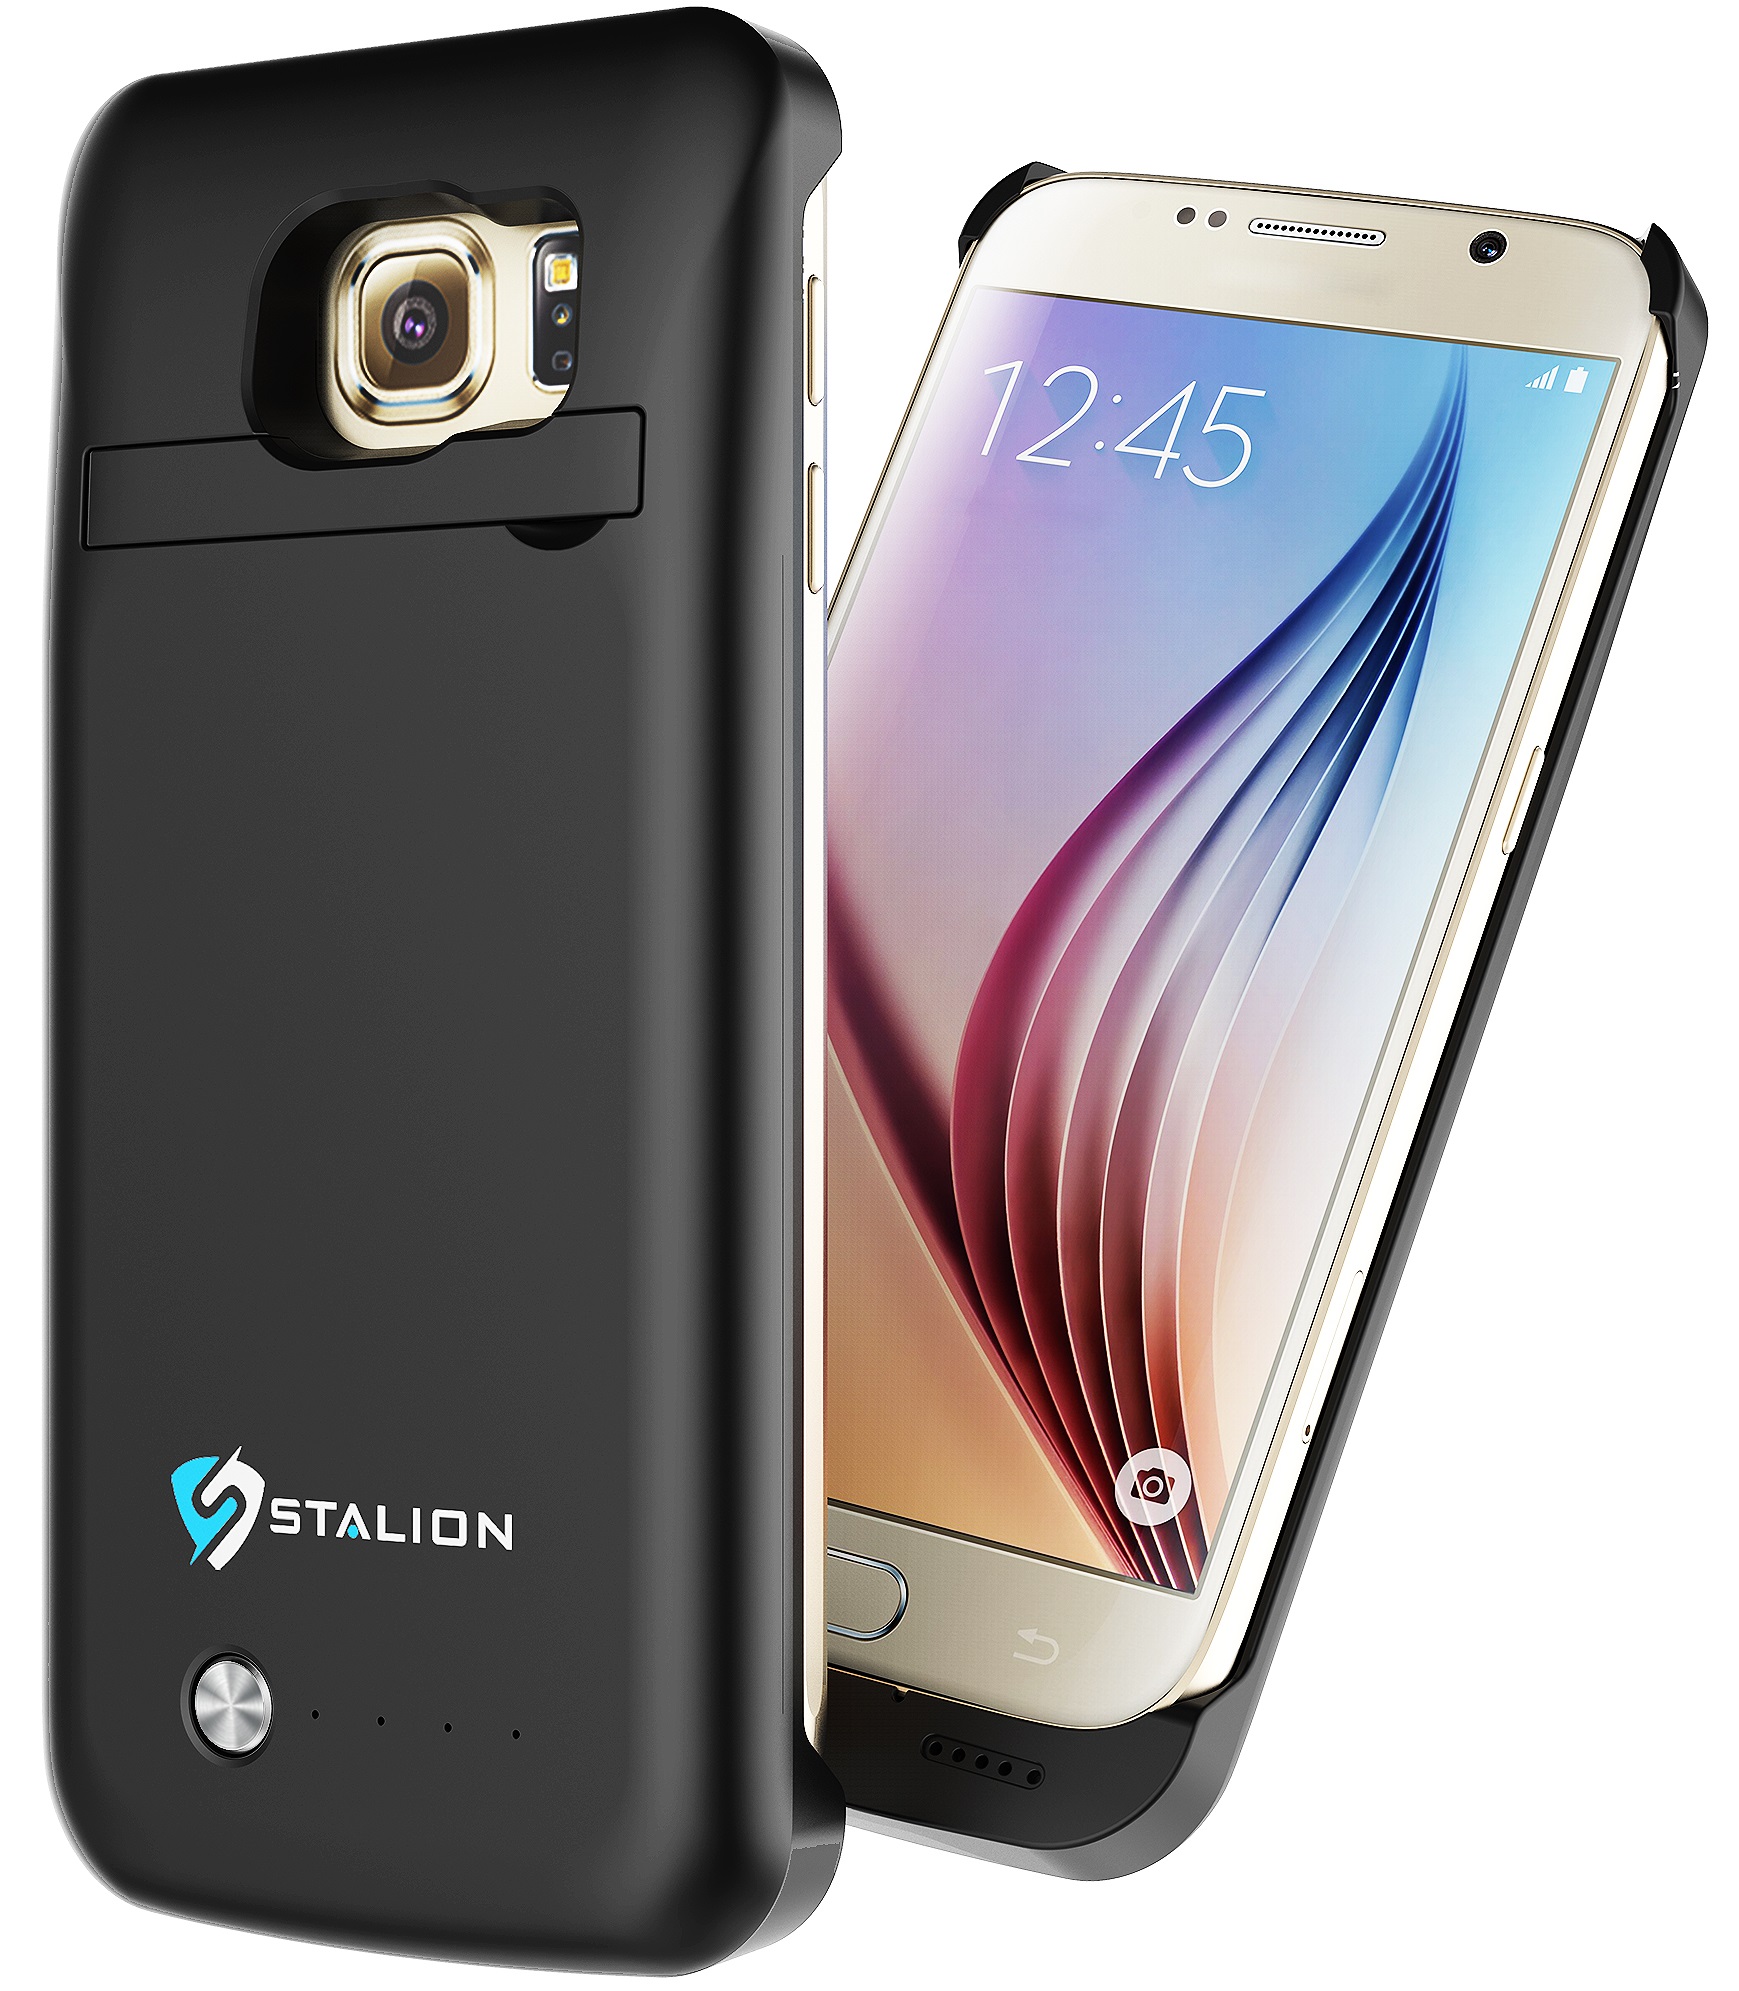 Stalion Stamina 3500mAh Rechargable Battery Case for Samsung Galaxy S6